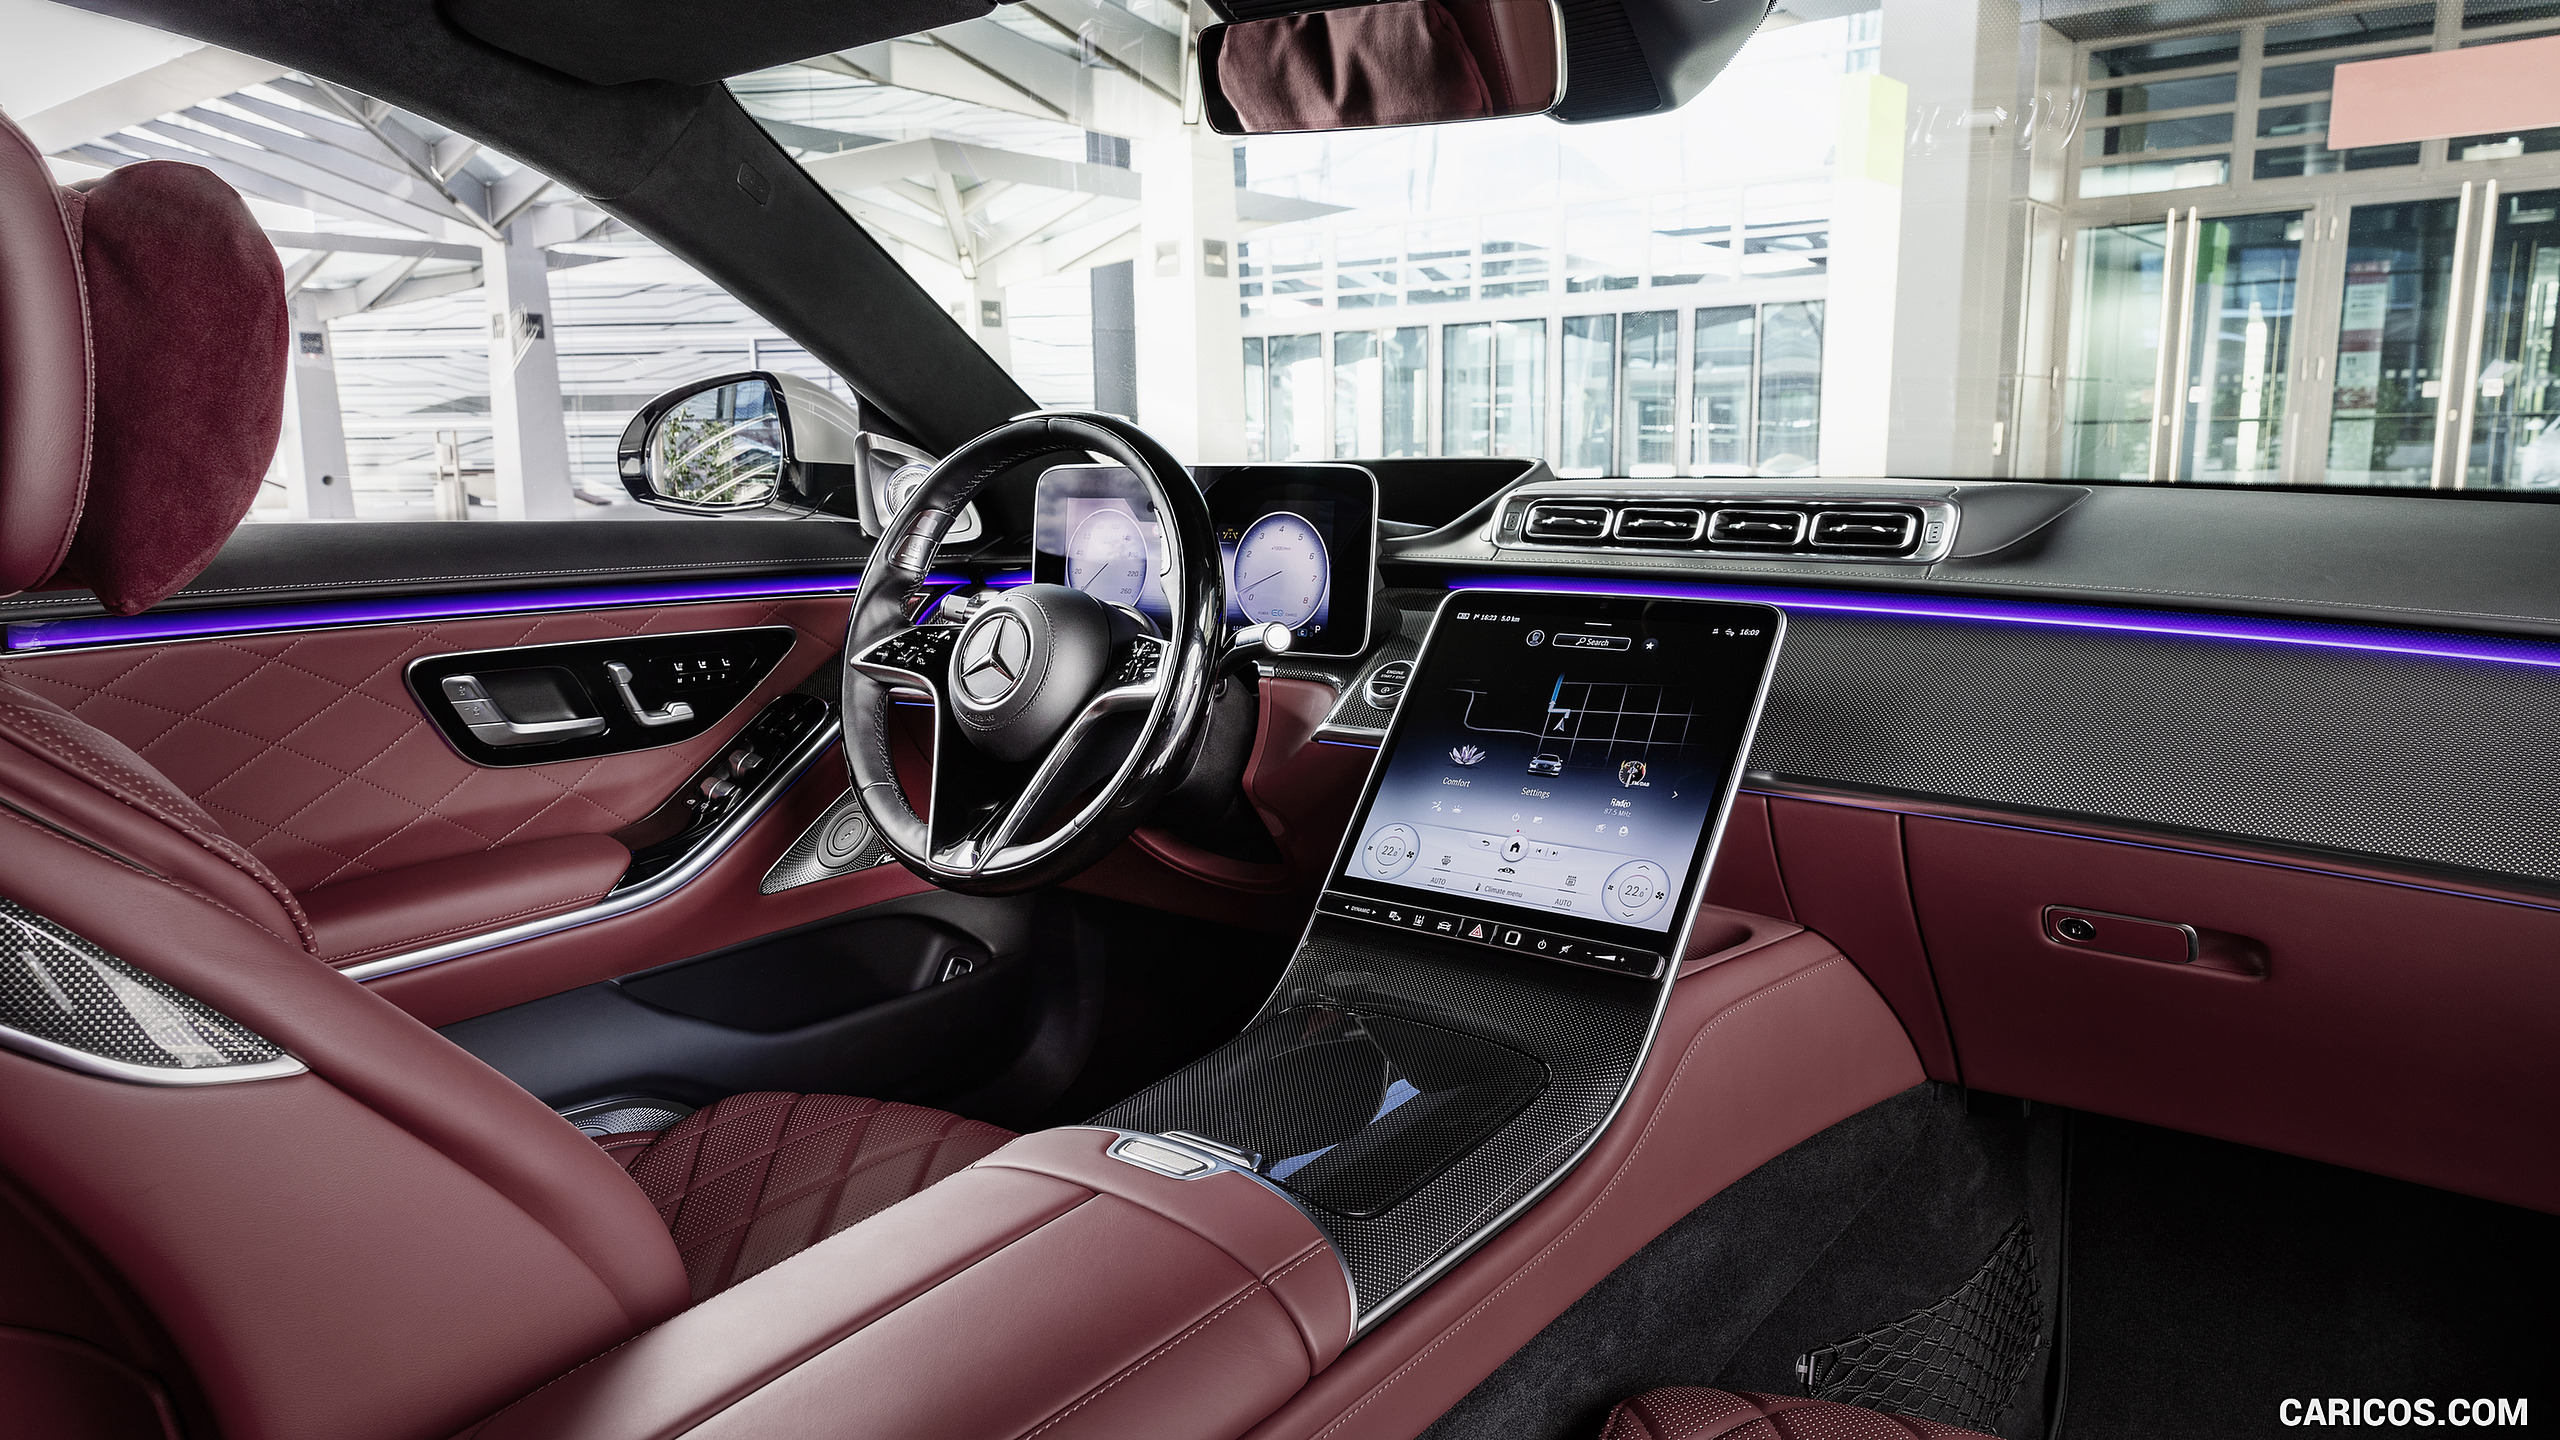 2021 Mercedes-Benz S-Class (Color: Leather Nappa Black/Carmin Red) - Interior, #40 of 316